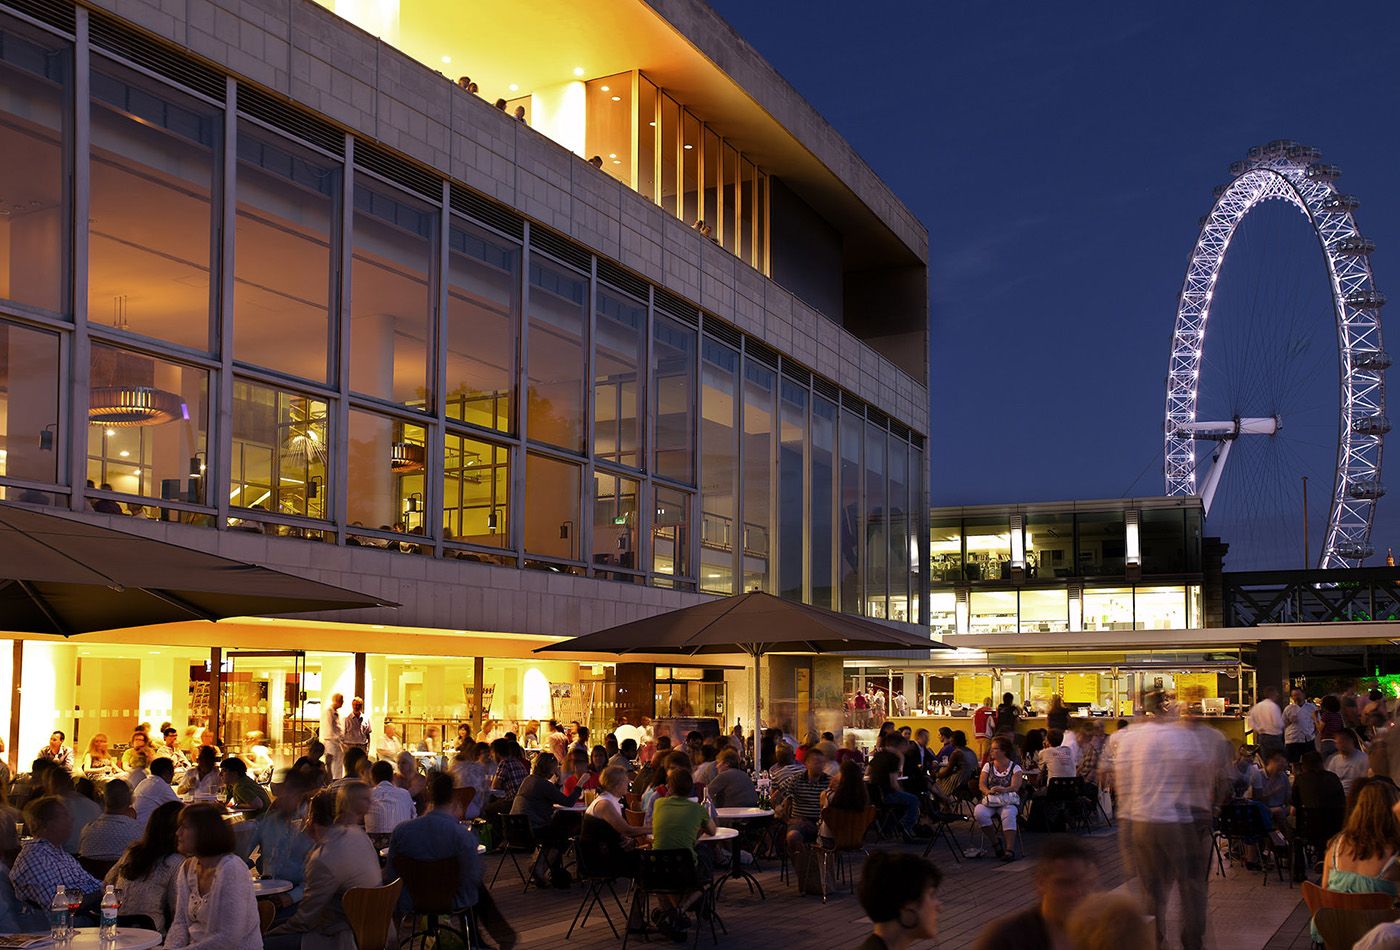 Evening photograph of Skylon building with the London Eye in the background